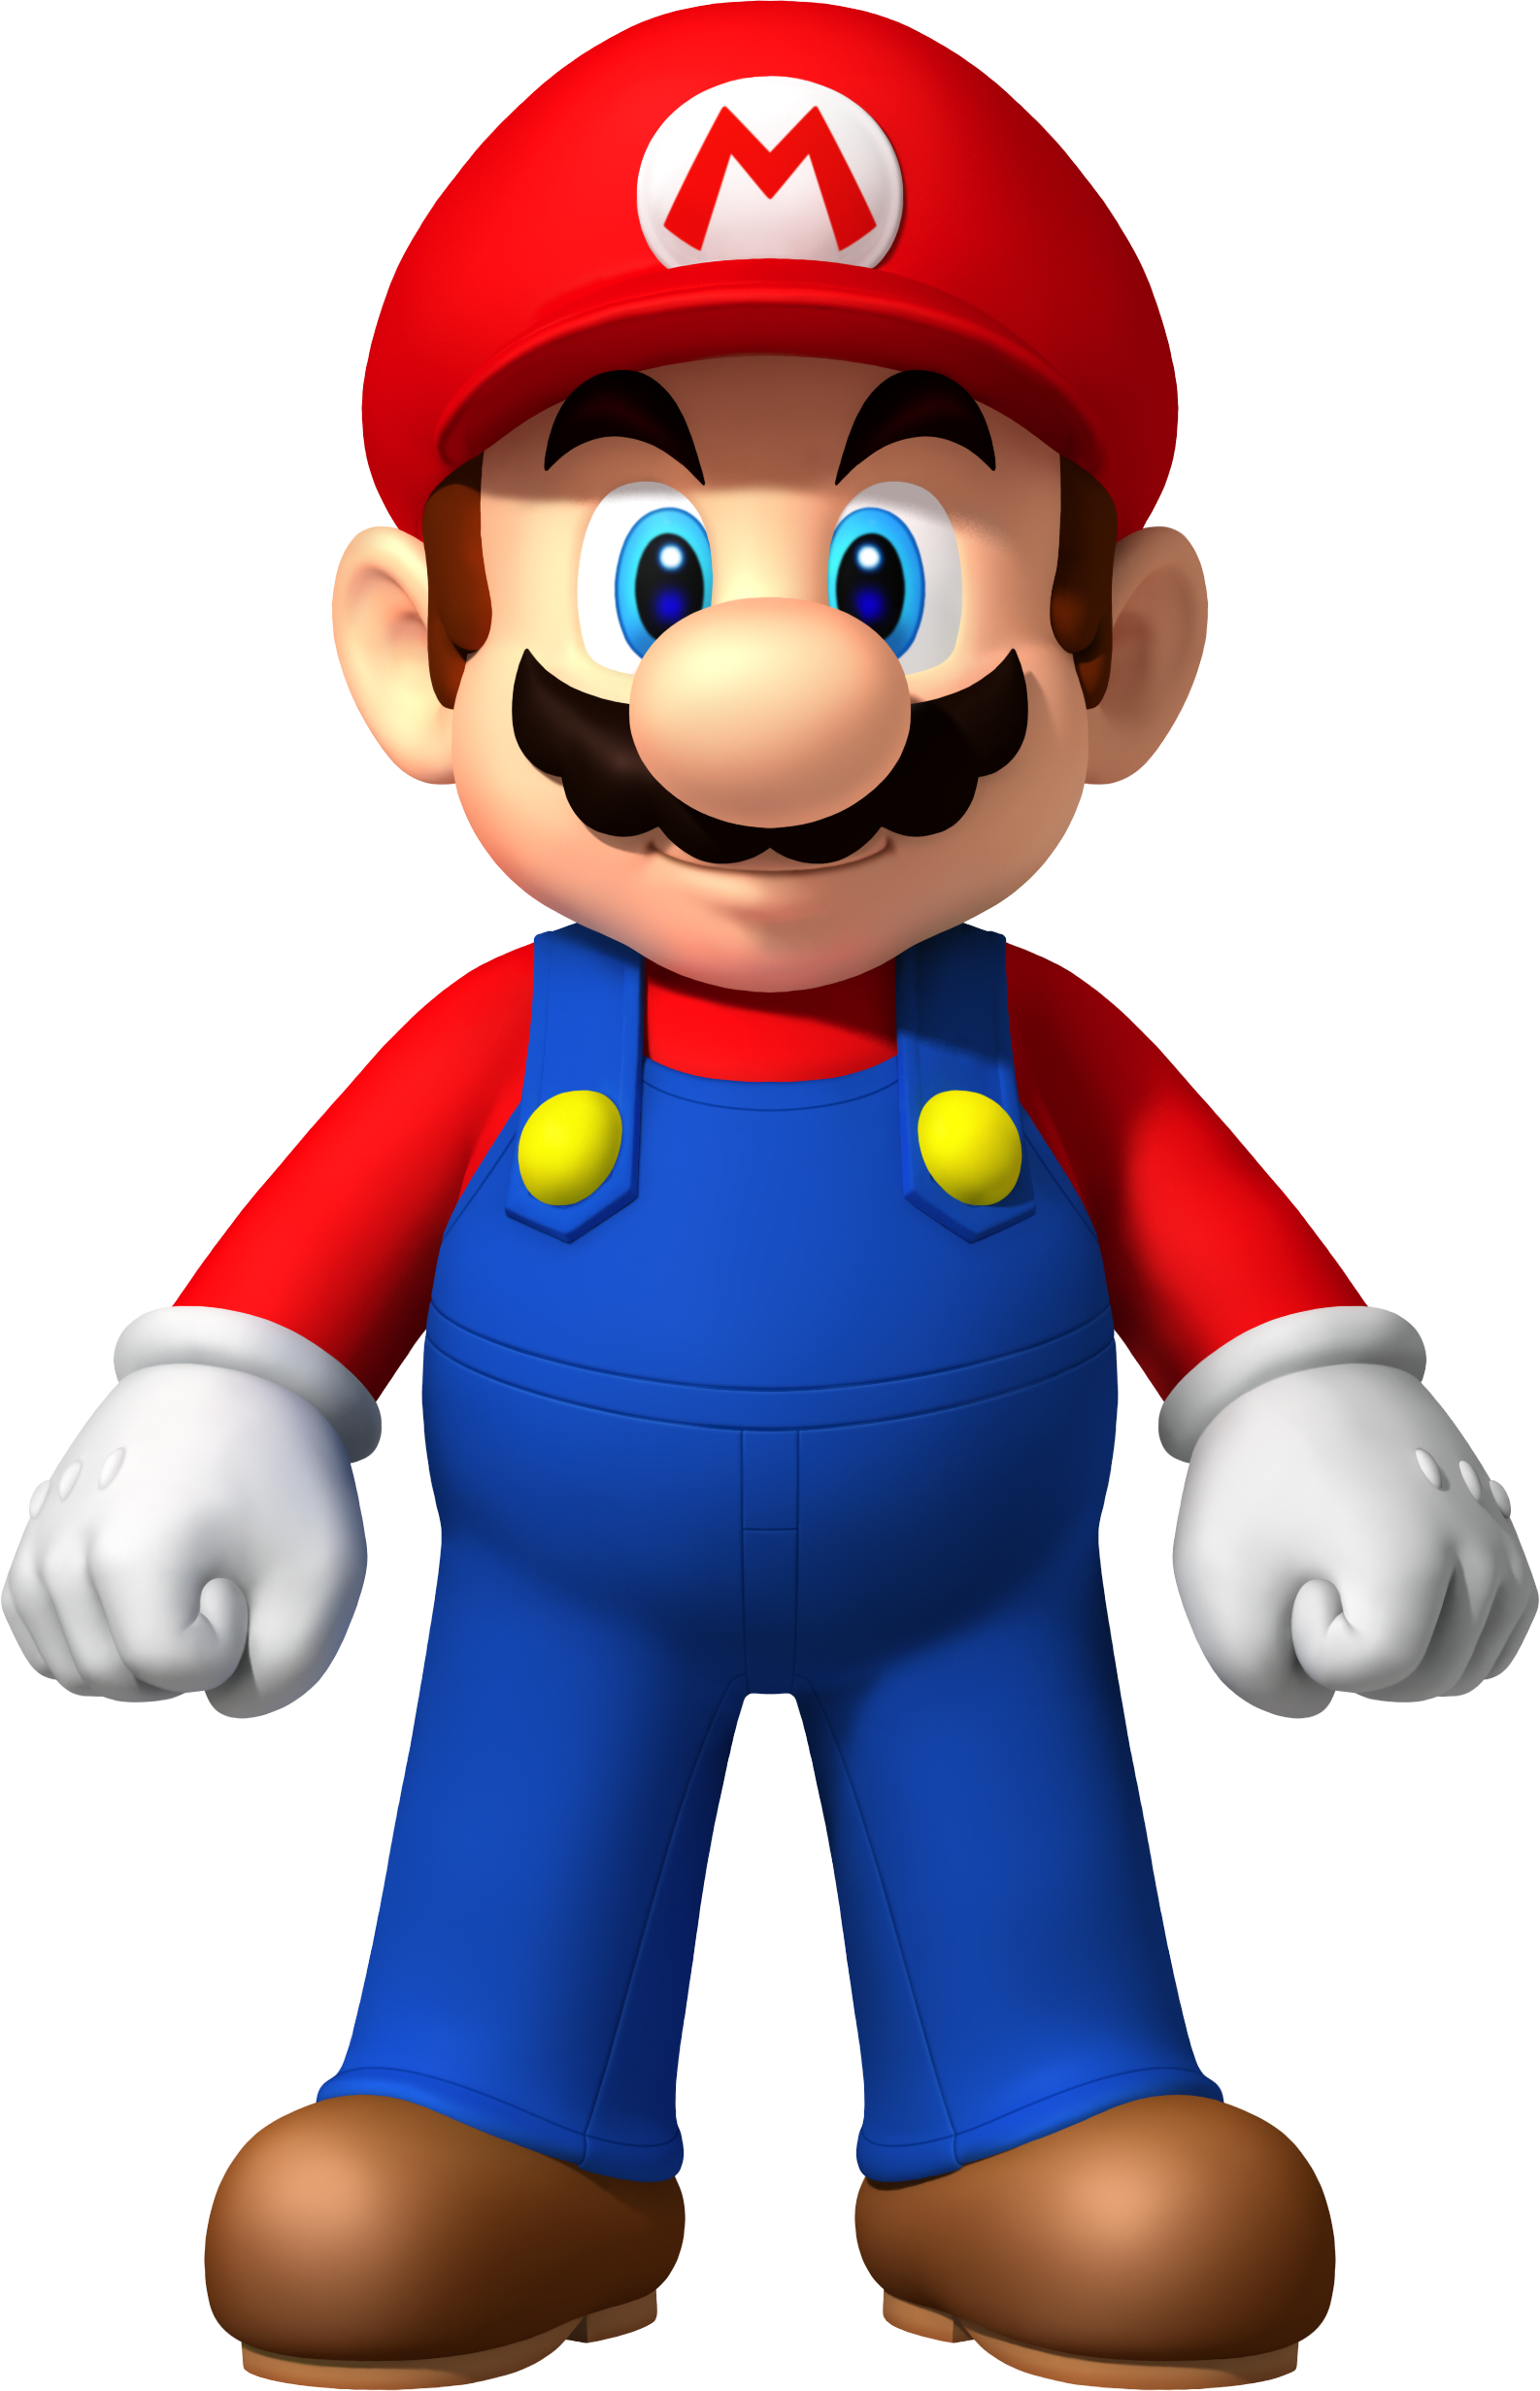 Mario Brothers Clip Art - ClipArt Best - ClipArt Best